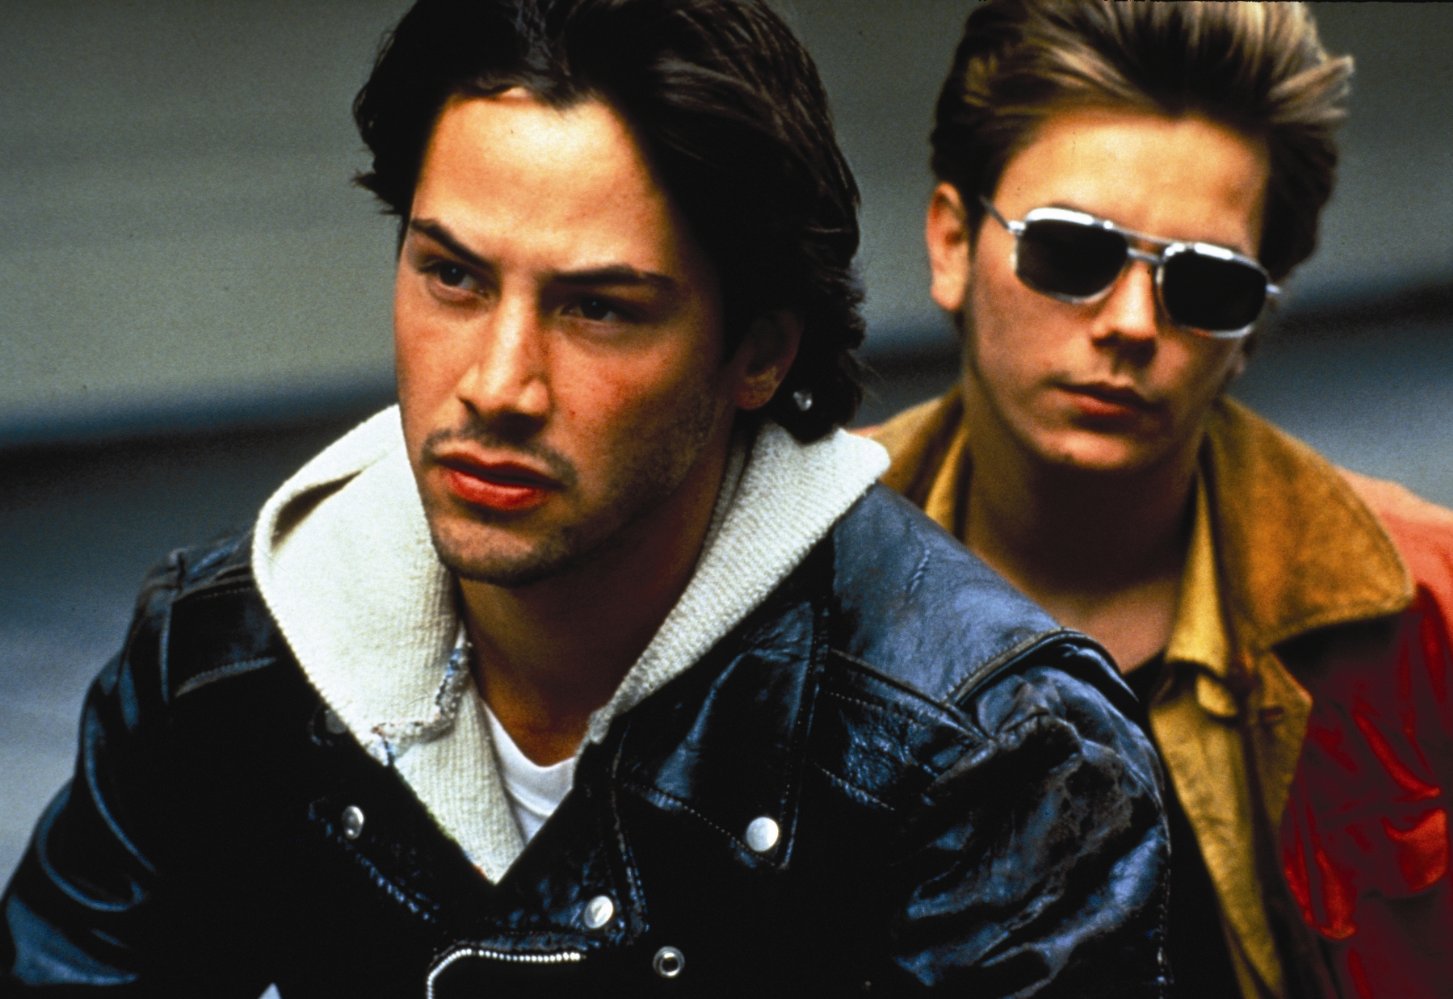 A Place to Call Home: The Search for Love and Identity in ‘My Own Private Idaho’